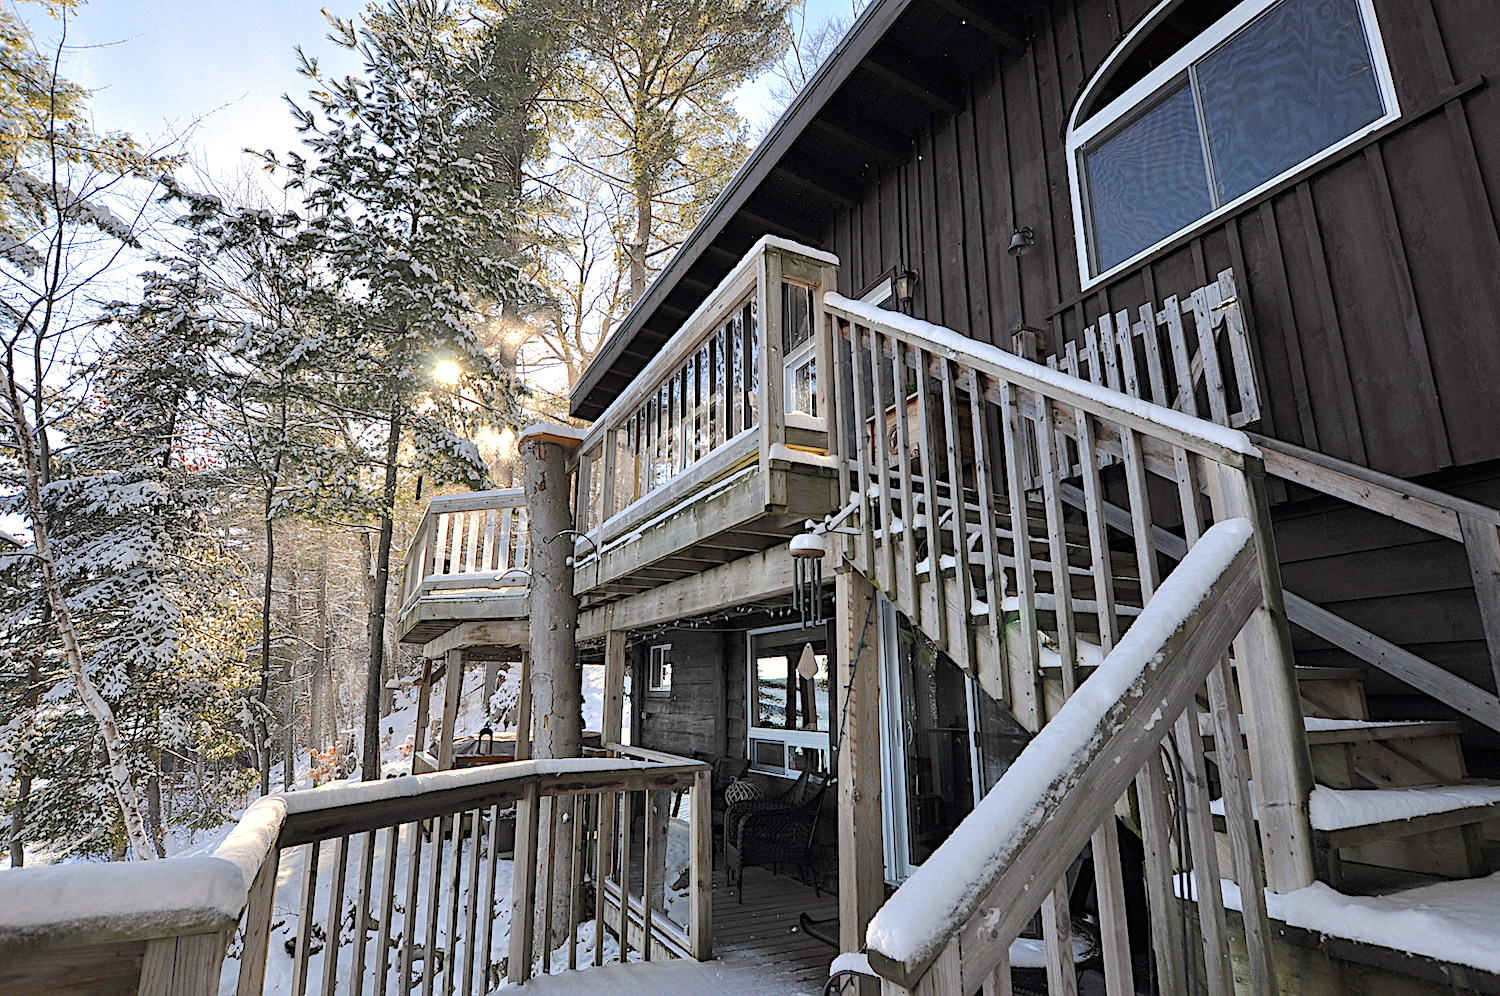 Boshkung Lake Paradise Pines - Lower entrance patio and deck with hot tub